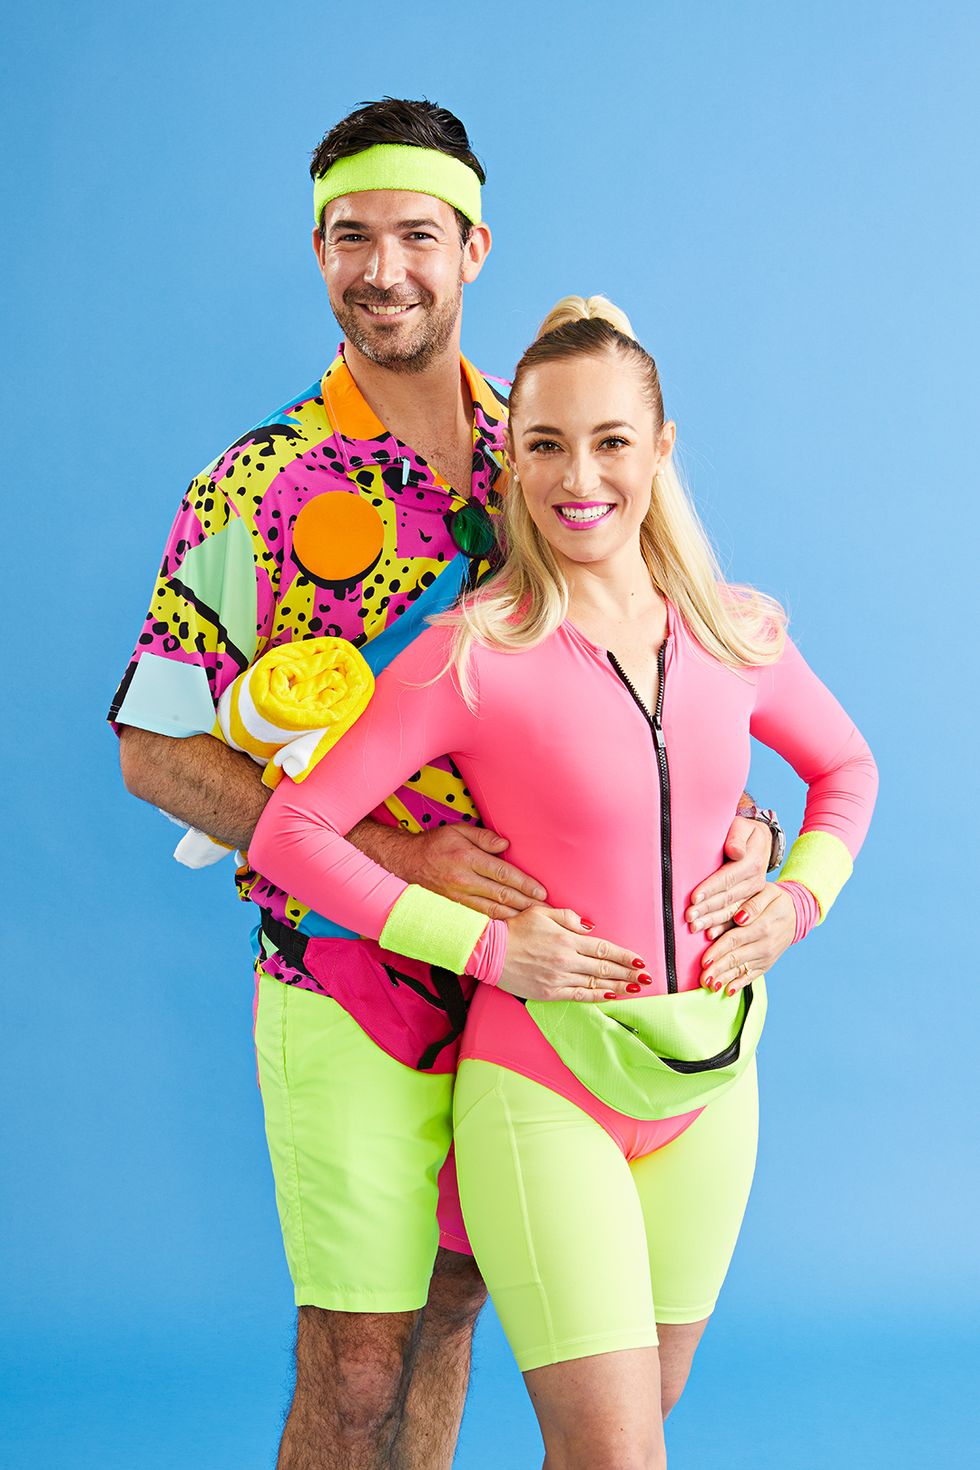 homemade halloween costumes, woman and man next to each other wearing green and pink workout attire